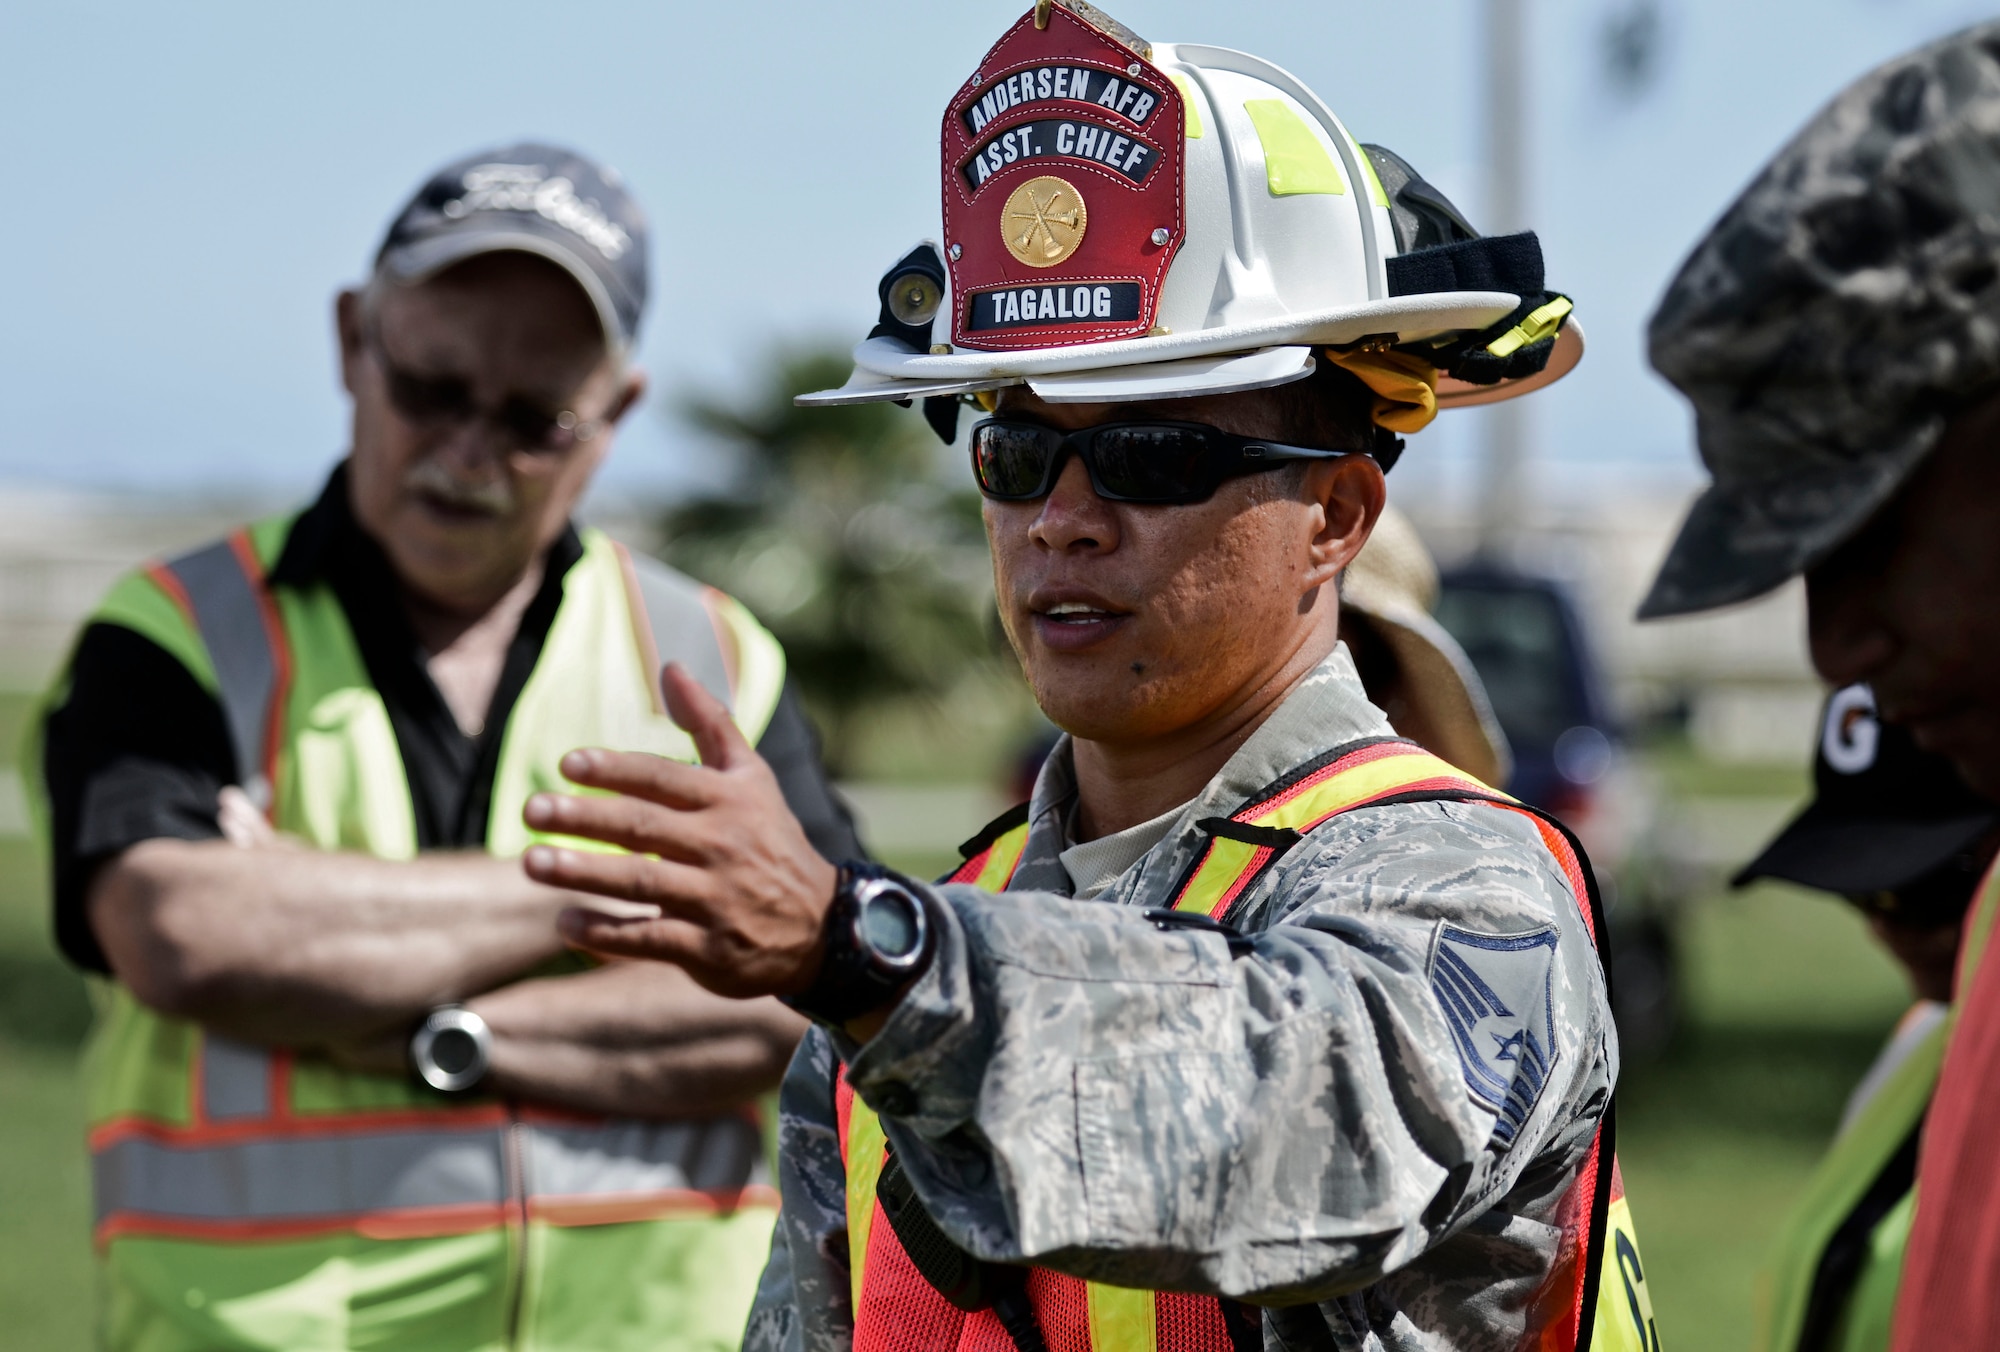 Master Sgt. Francis Tagalog, 36th Civil Engineer Squadron Fire and Emergency Services incident commander for the event, thanks the participating agencies after completing the field training exercise portion of the annual multi-agency fuel spill response training event Sept. 26, 2013, at the 36th Logistics Squadron Fuels Management Flight compound on Andersen Air Force Base, Guam. More than 29 people from a total of eight agencies participated in the exercise, to include representatives from 36th Medical Group, 36th LRS, 36th Security Forces Squadron and DZSP-21. (U.S. Air Force photo by Senior Airman Marianique Santos/Released) 